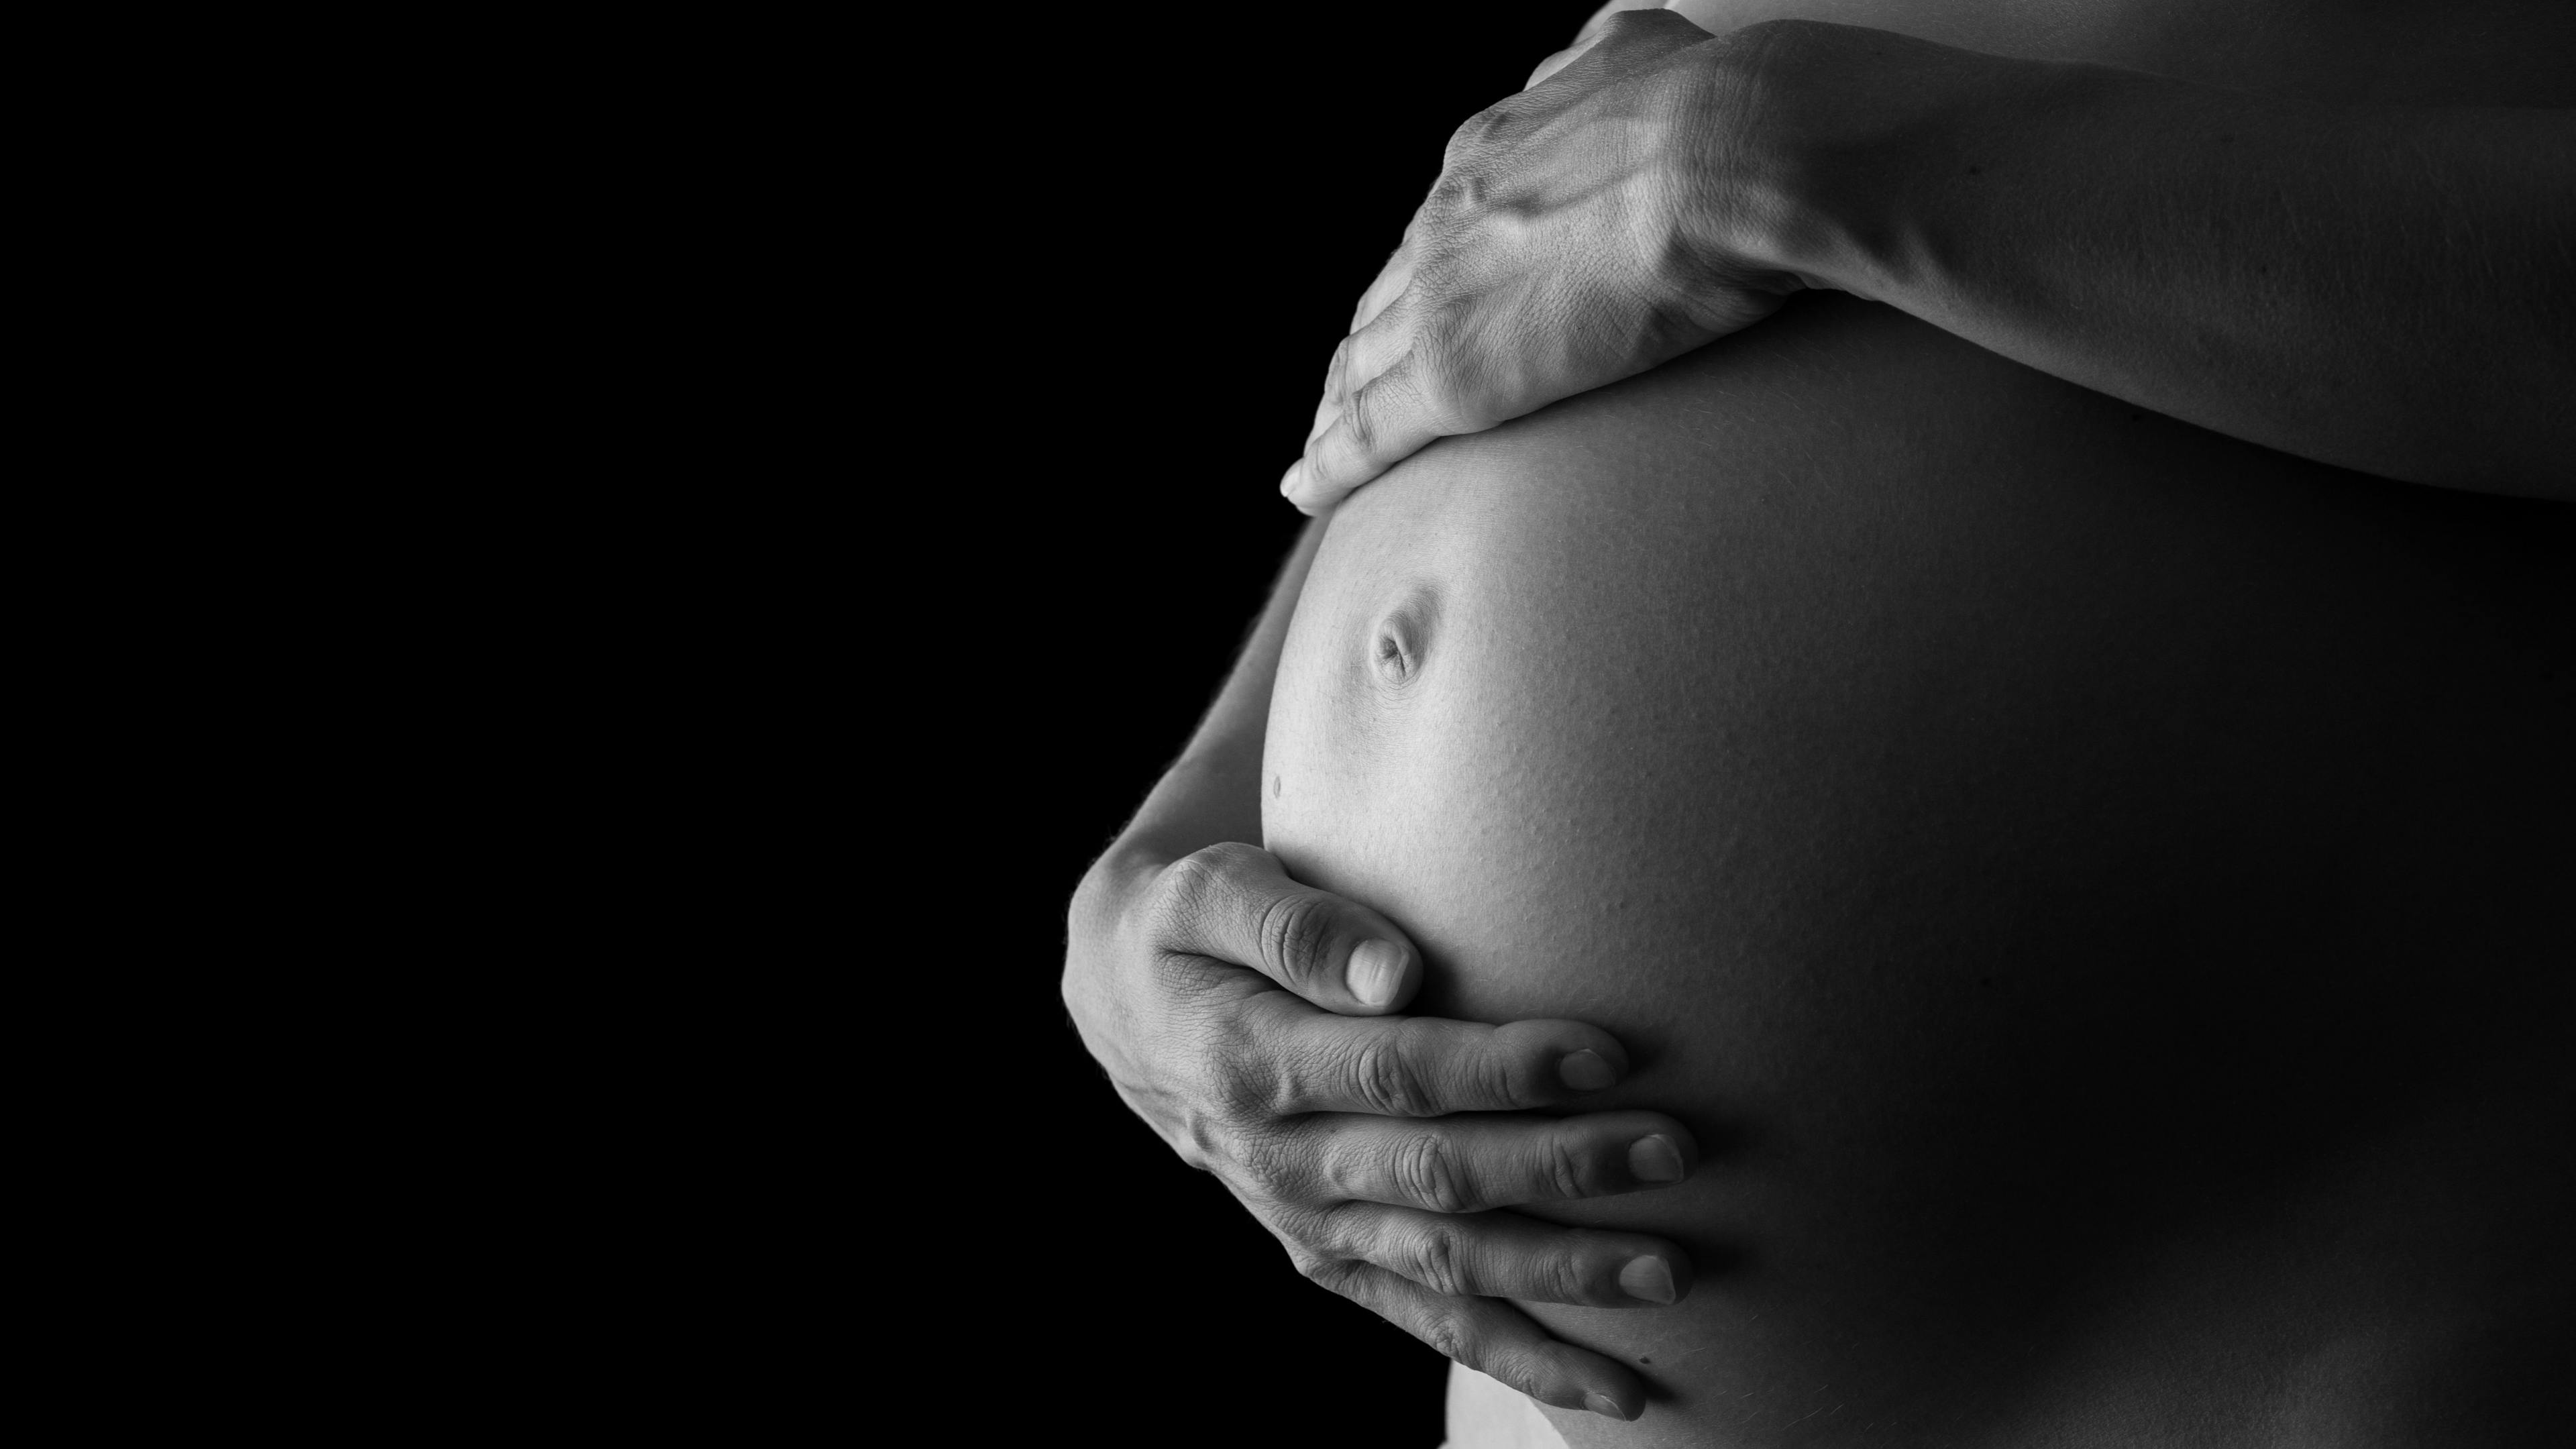 Maternal mortality soars across U.S., and some racial groups are hit hardest